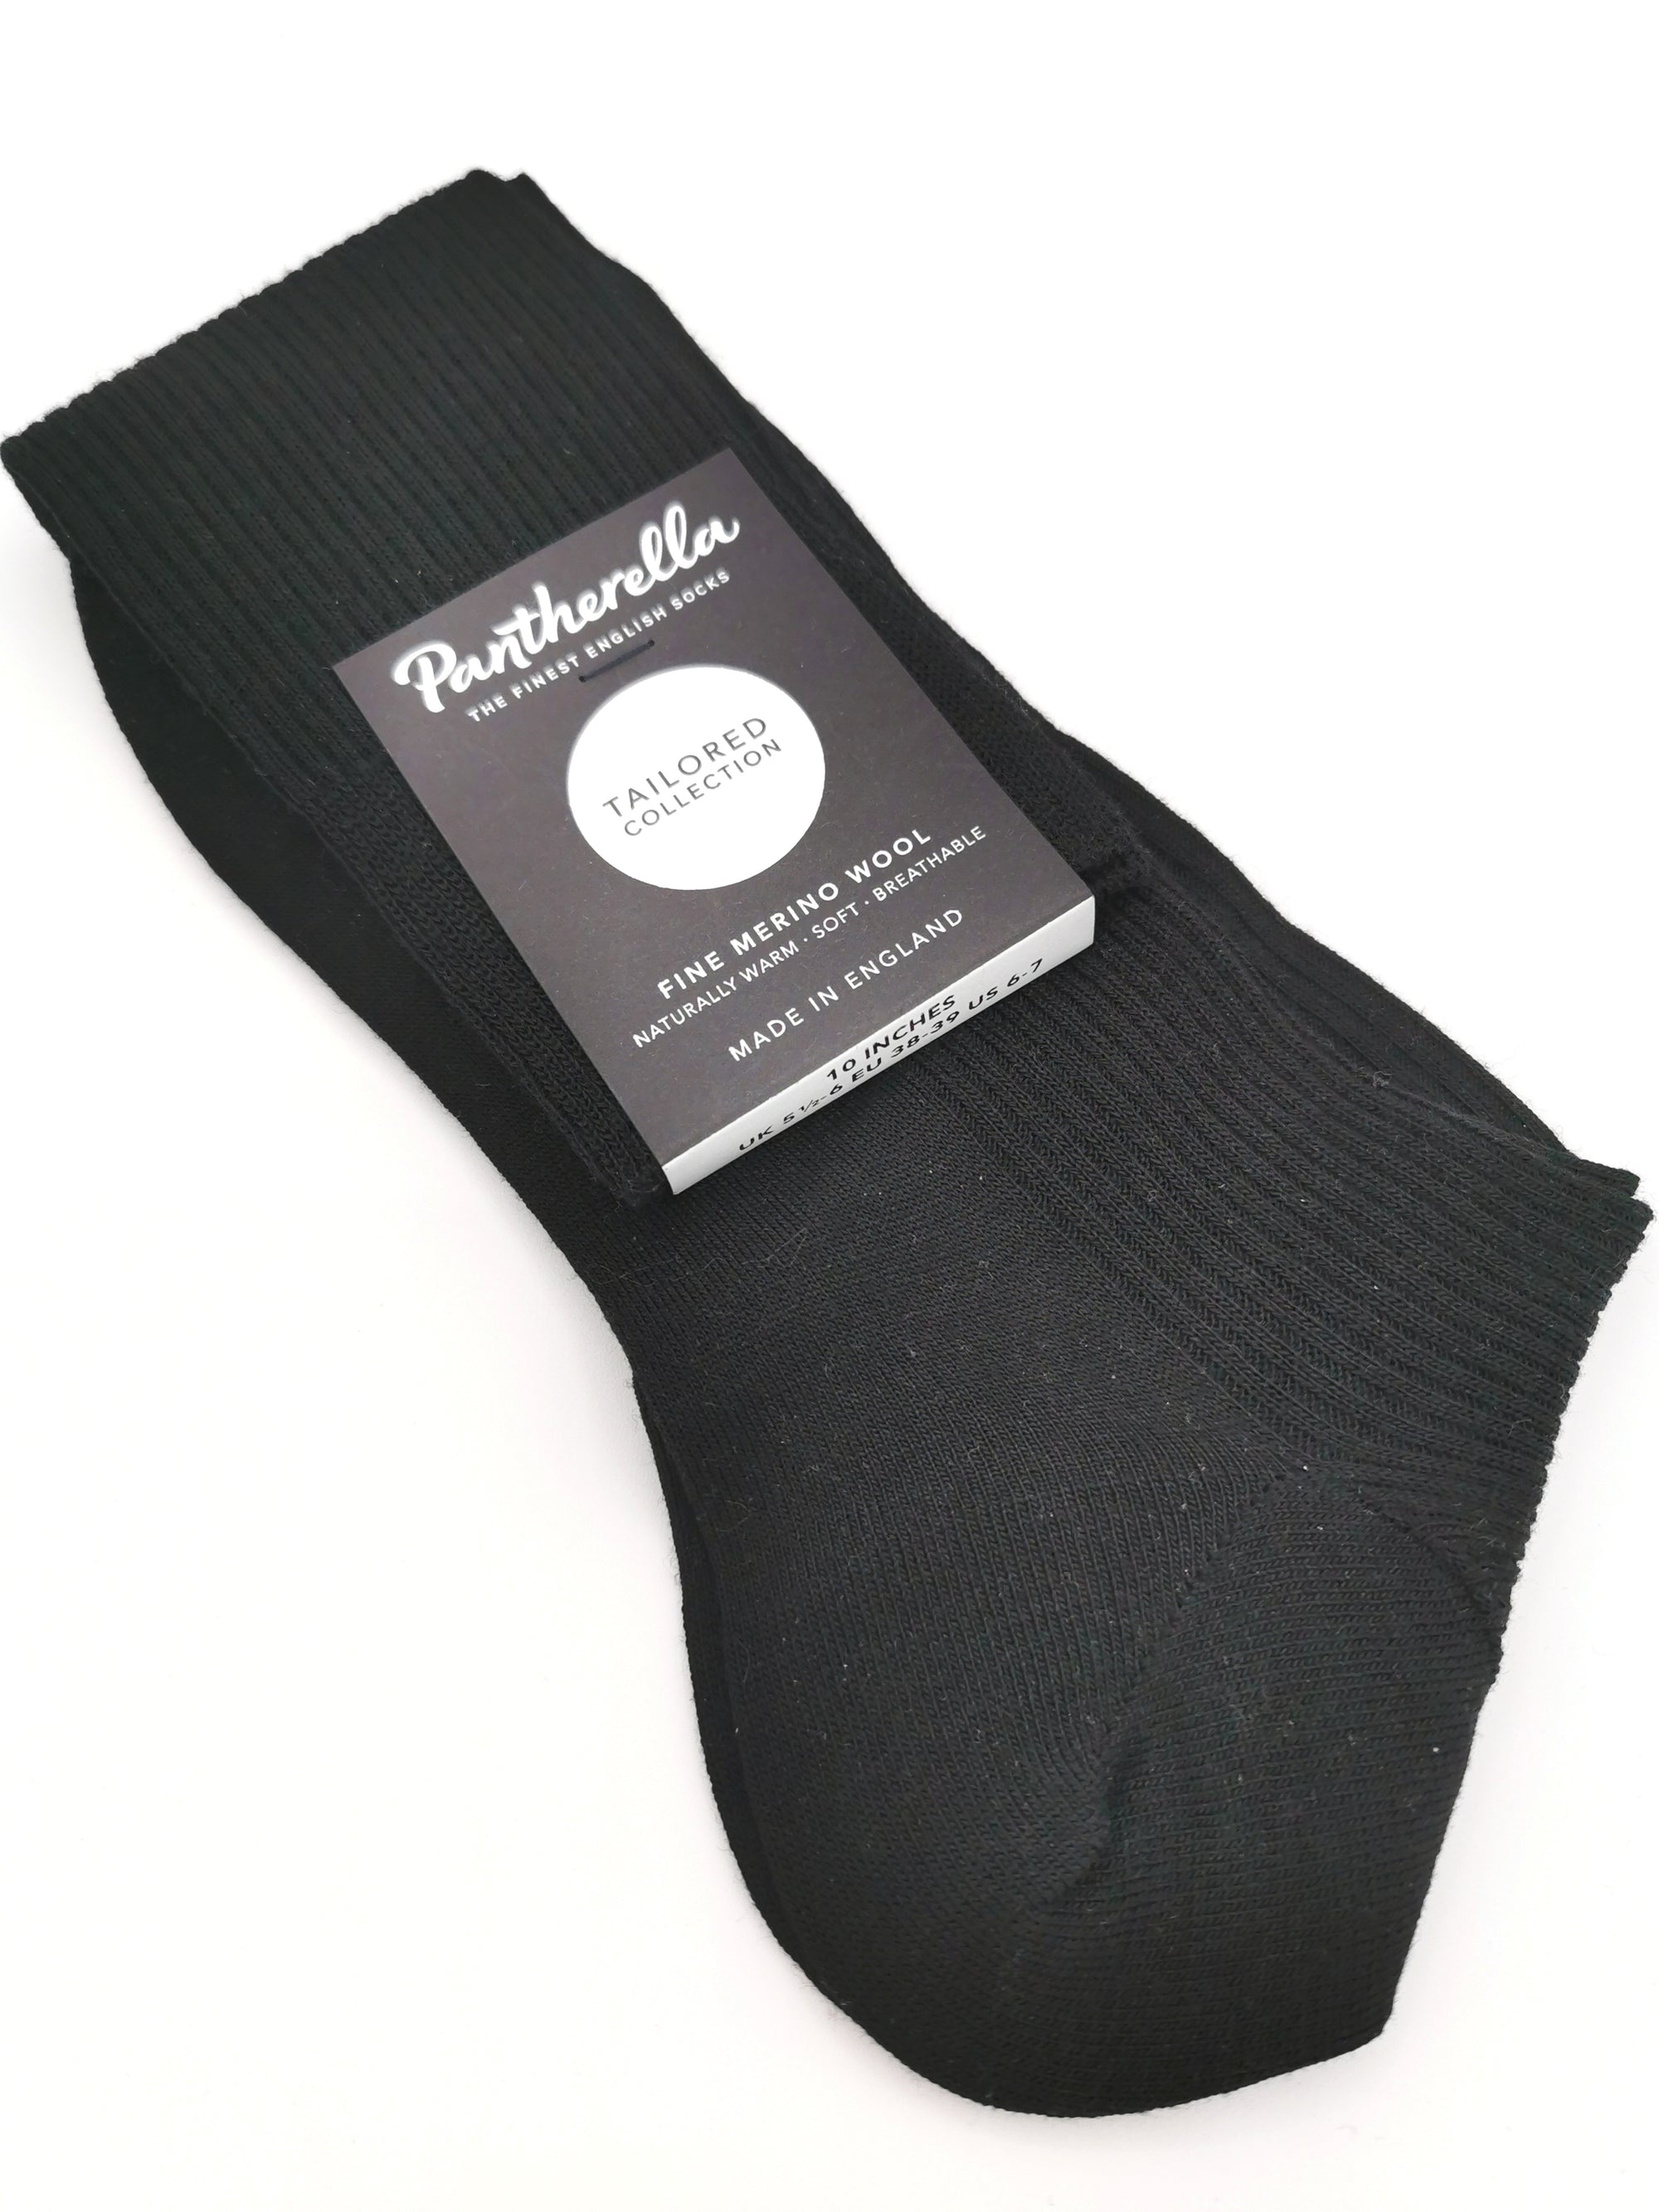 Chaussettes Pantherella Fine Merino Wool Longues Taille S